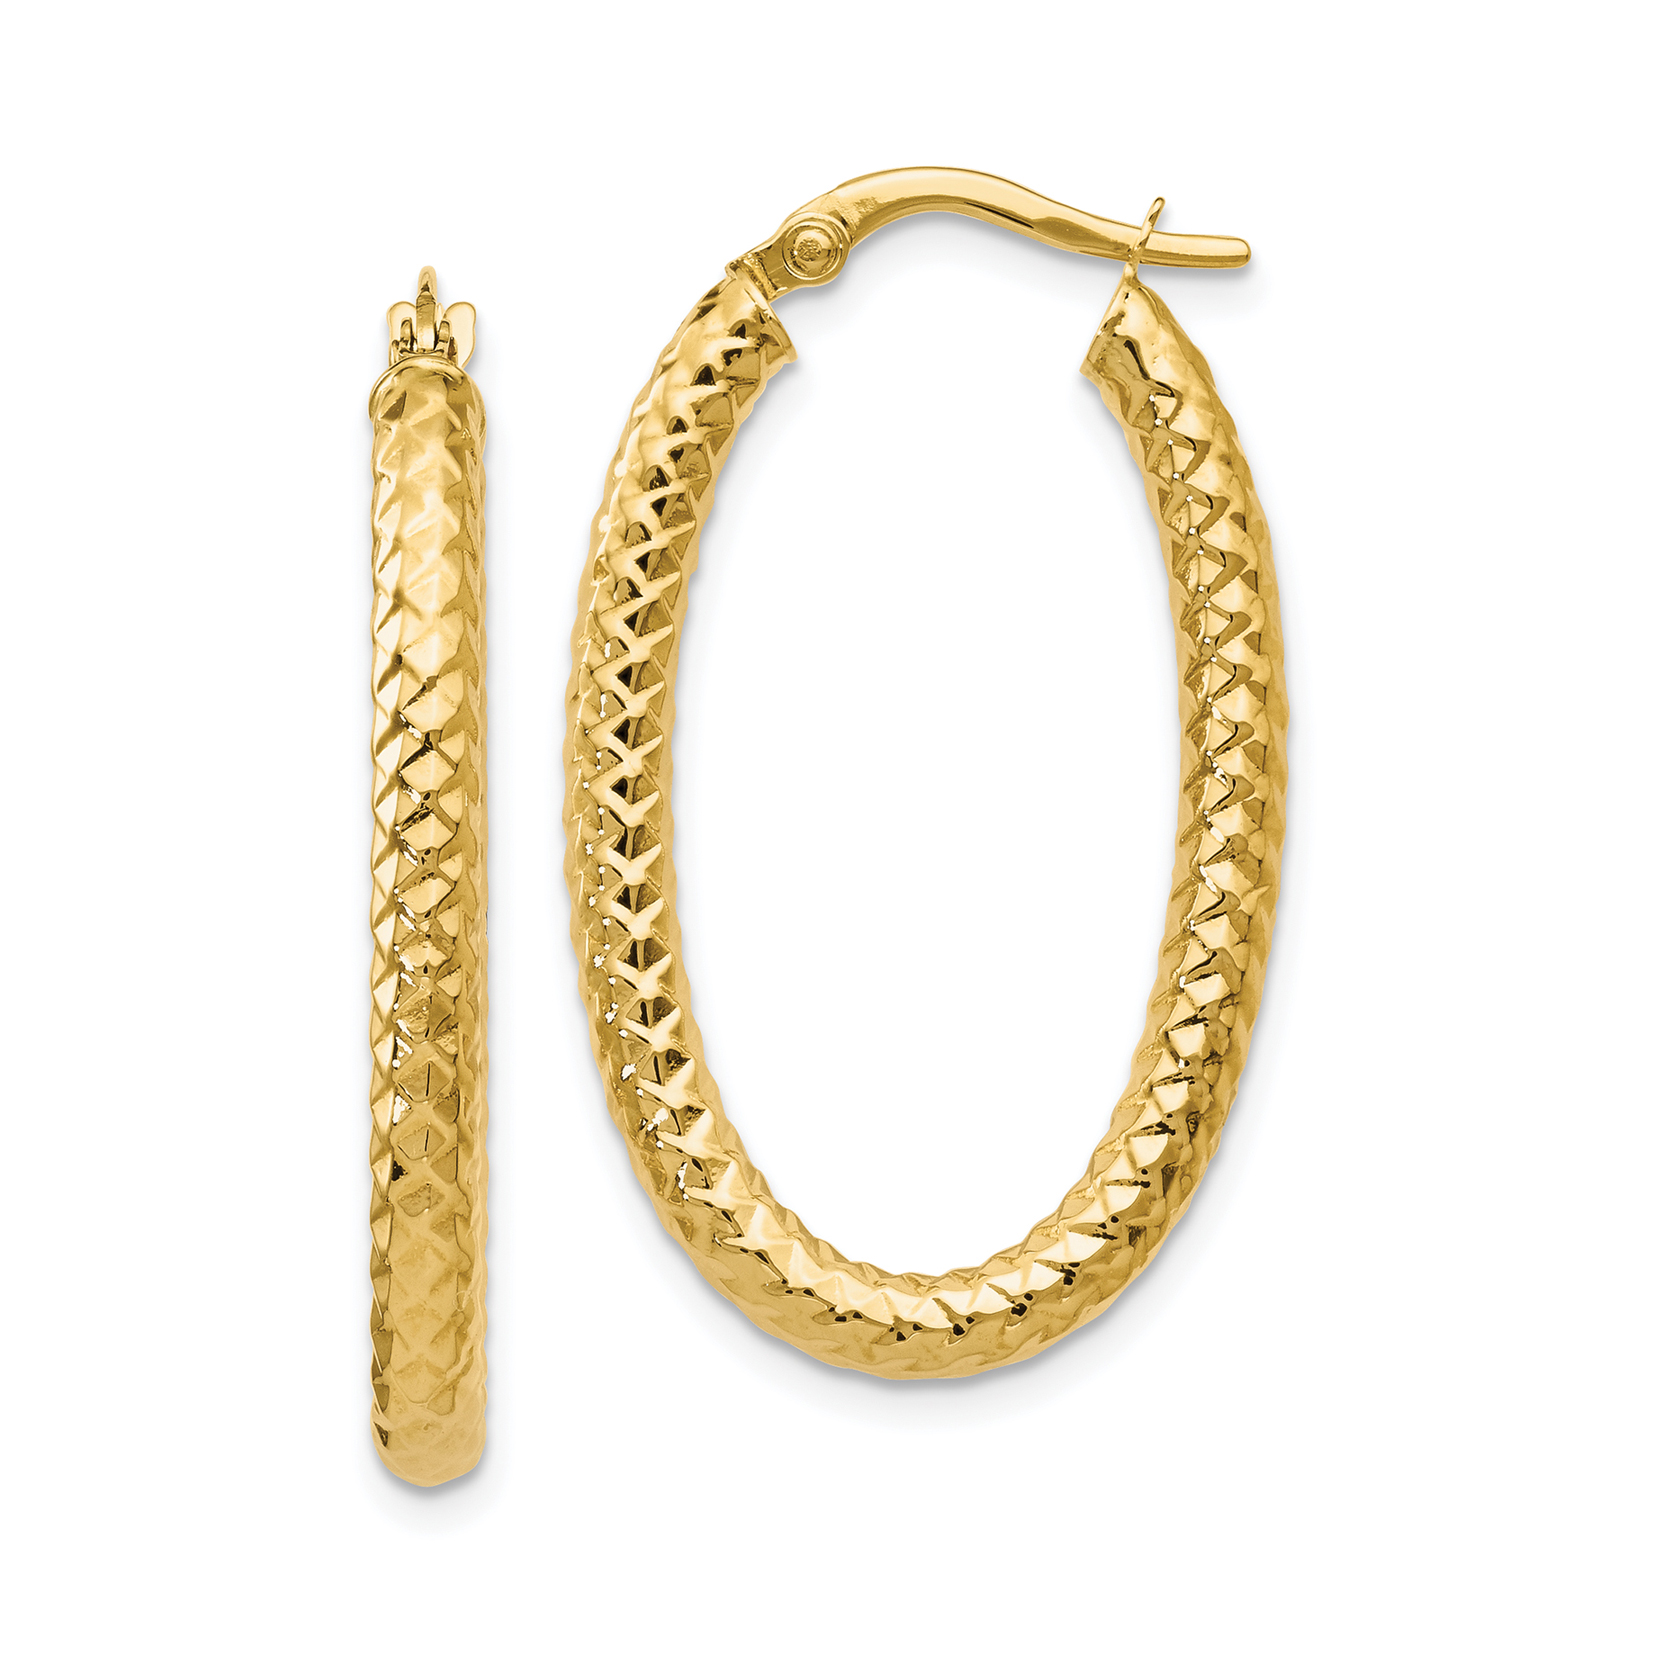 Yellow Gold Foreverlite Hollow Polished and Textured Oval Hoop Earrings